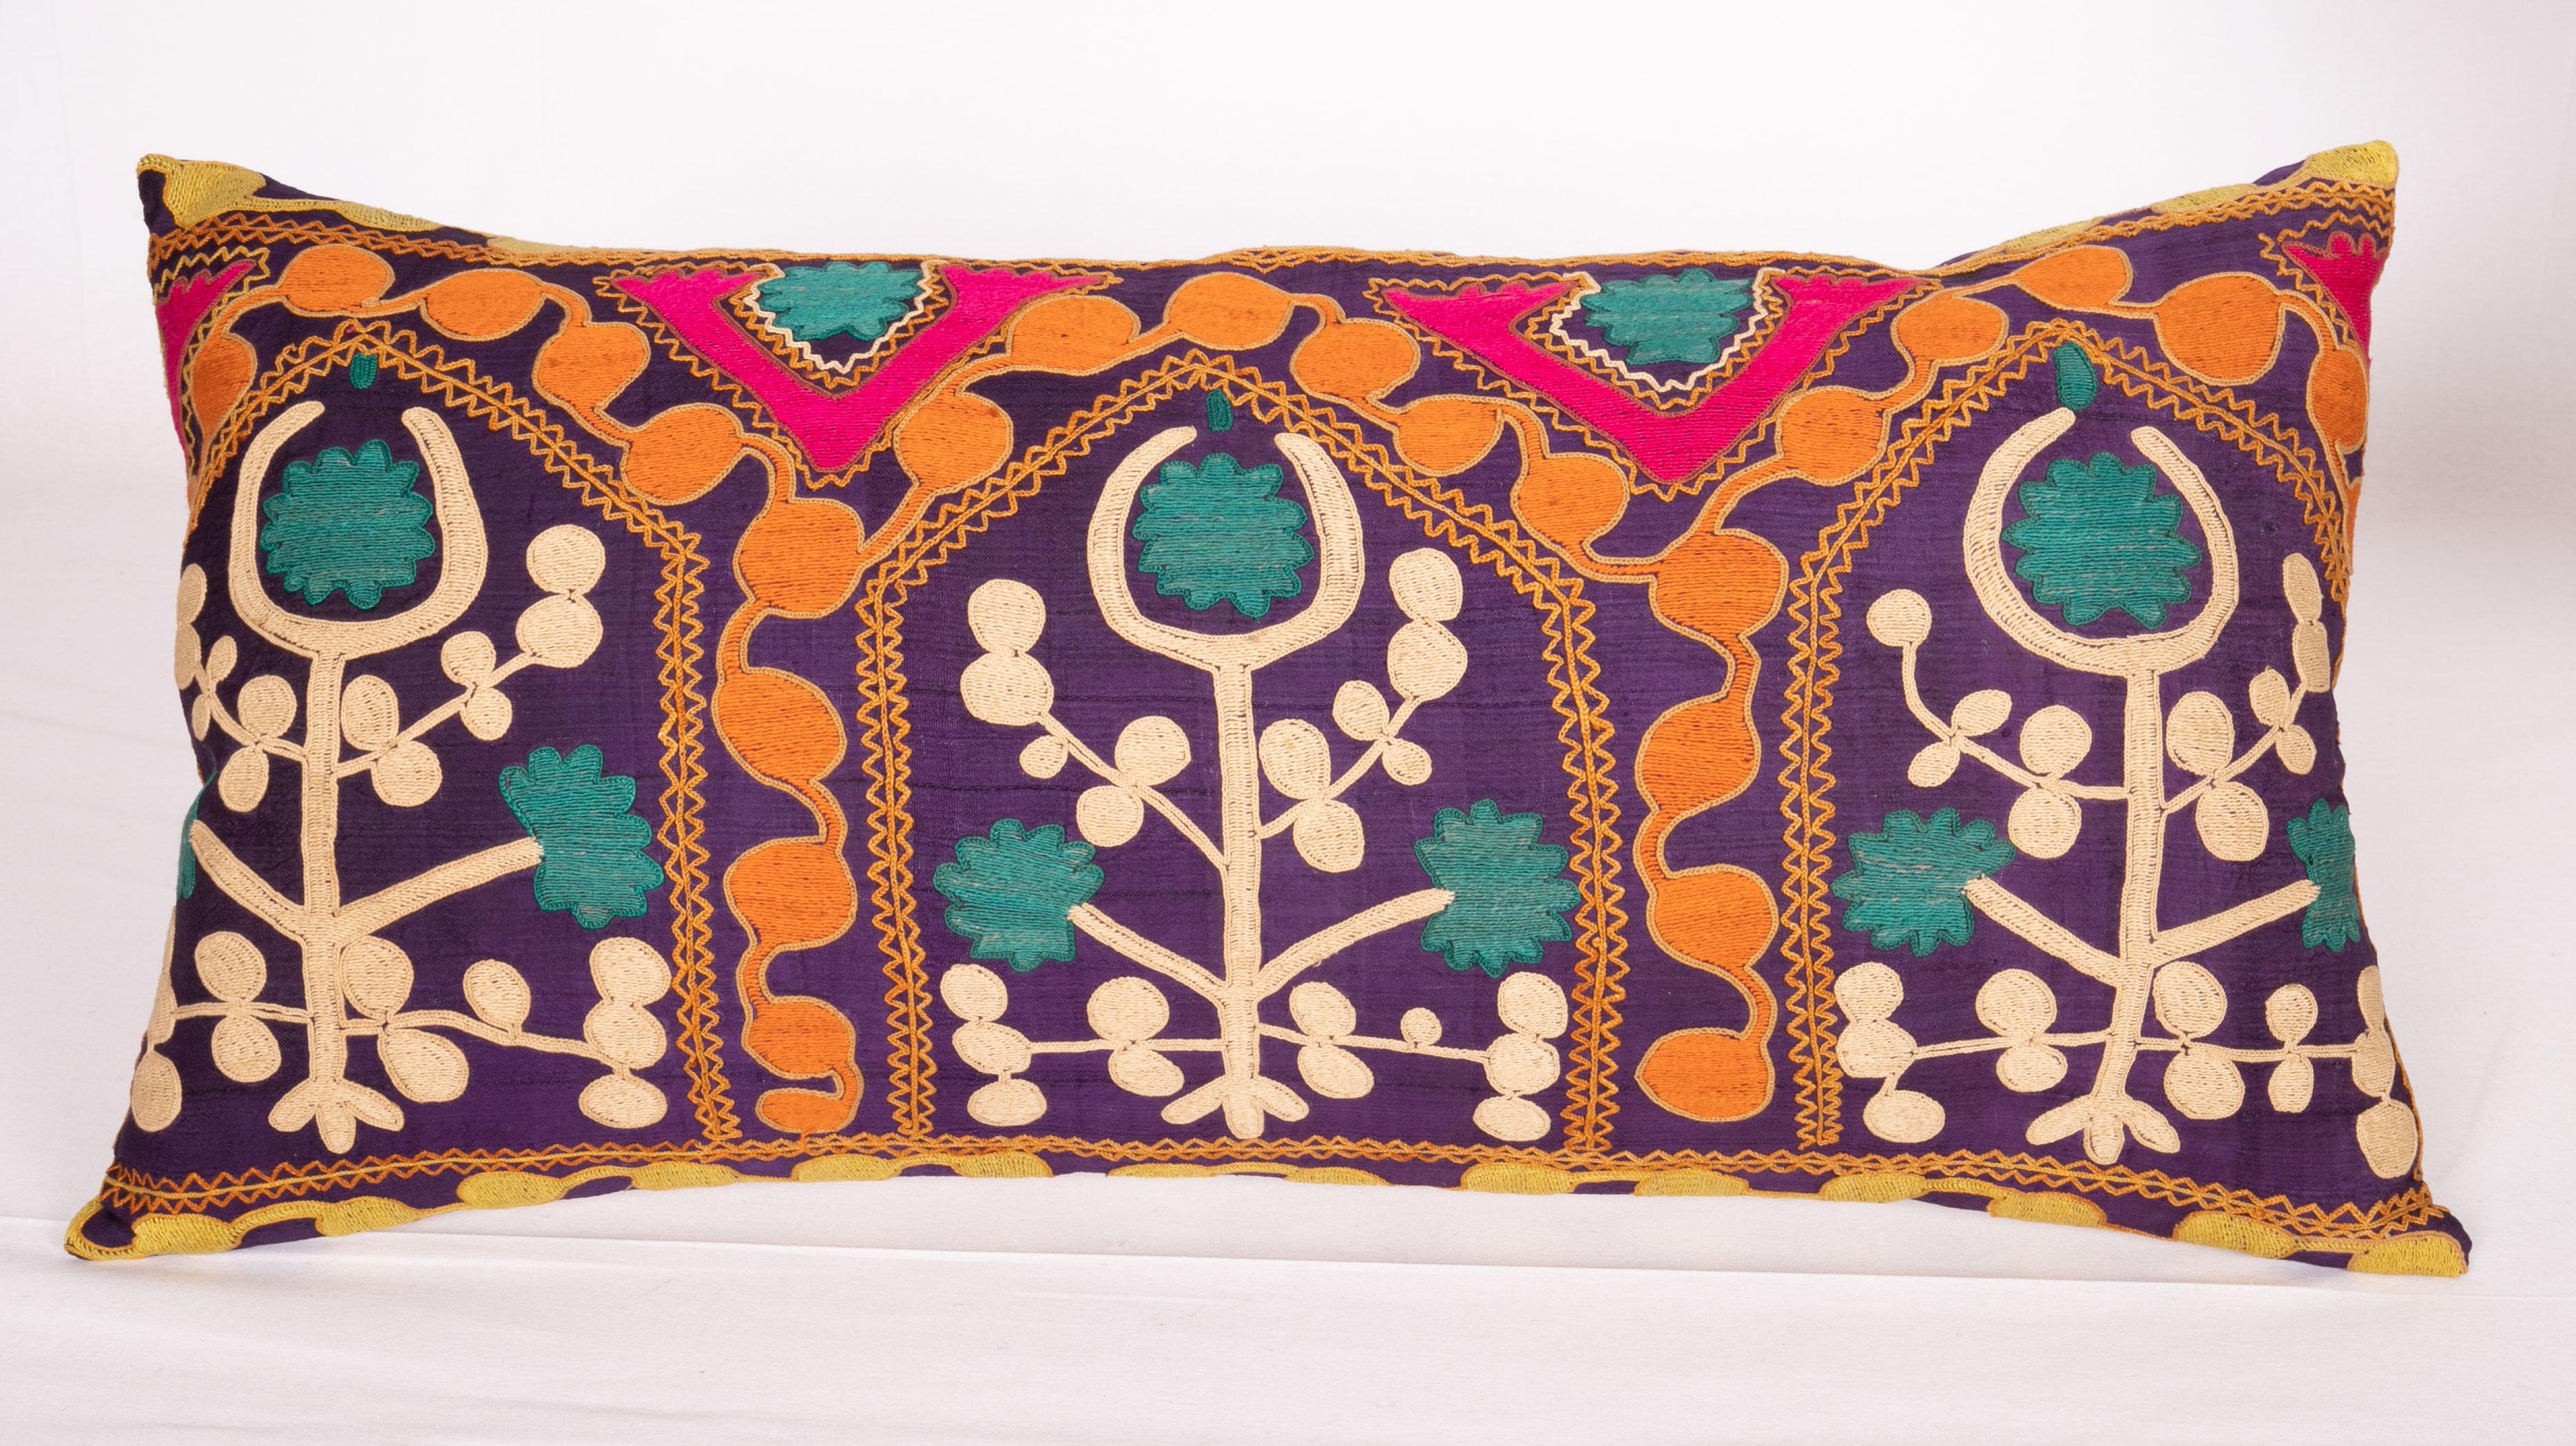 Cotton Old Silk Suzani Pillow Cases Made from an Early 20th Century Suzani